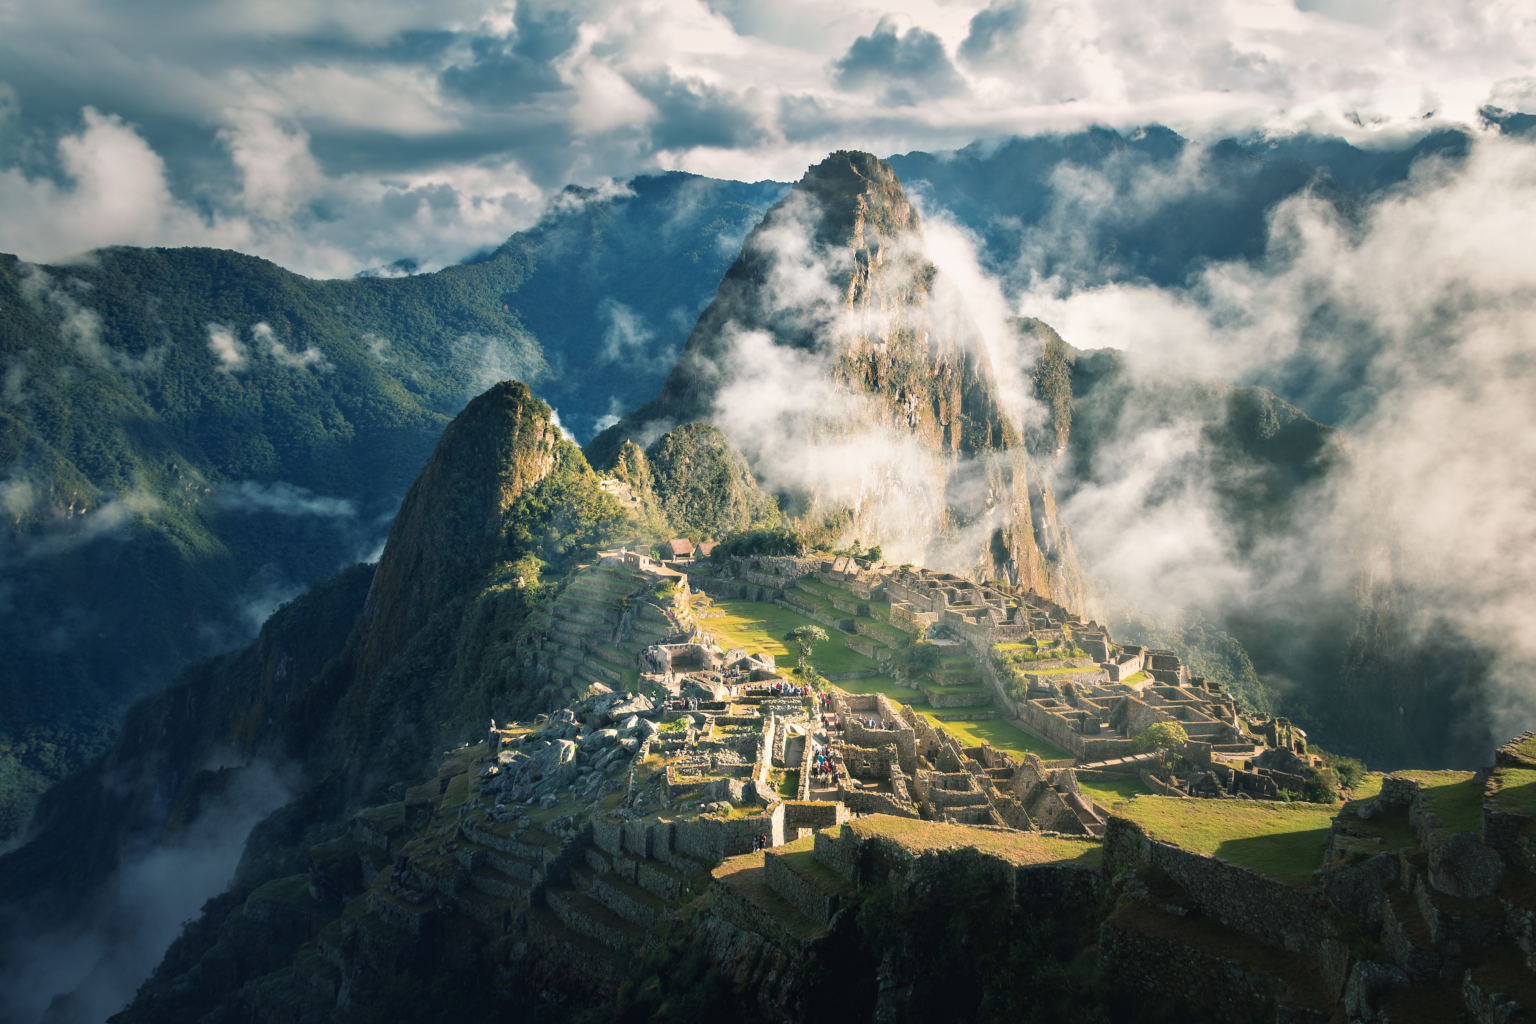 Machu Picchu surrounded by clouds